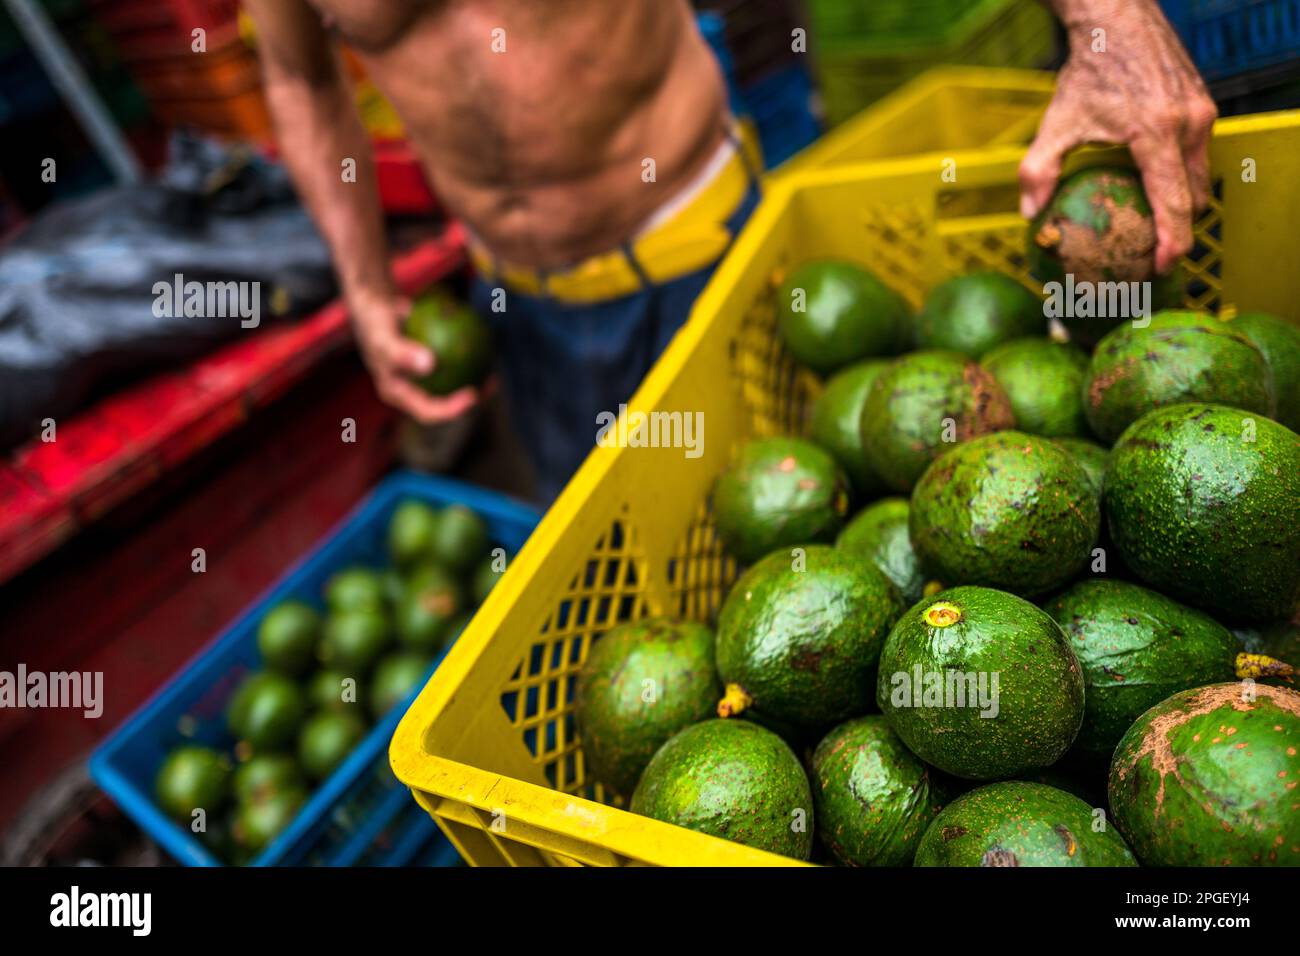 A Colombian worker transfers fresh avocados from one plastic crate to another in the street market in Cali, Colombia. Stock Photo